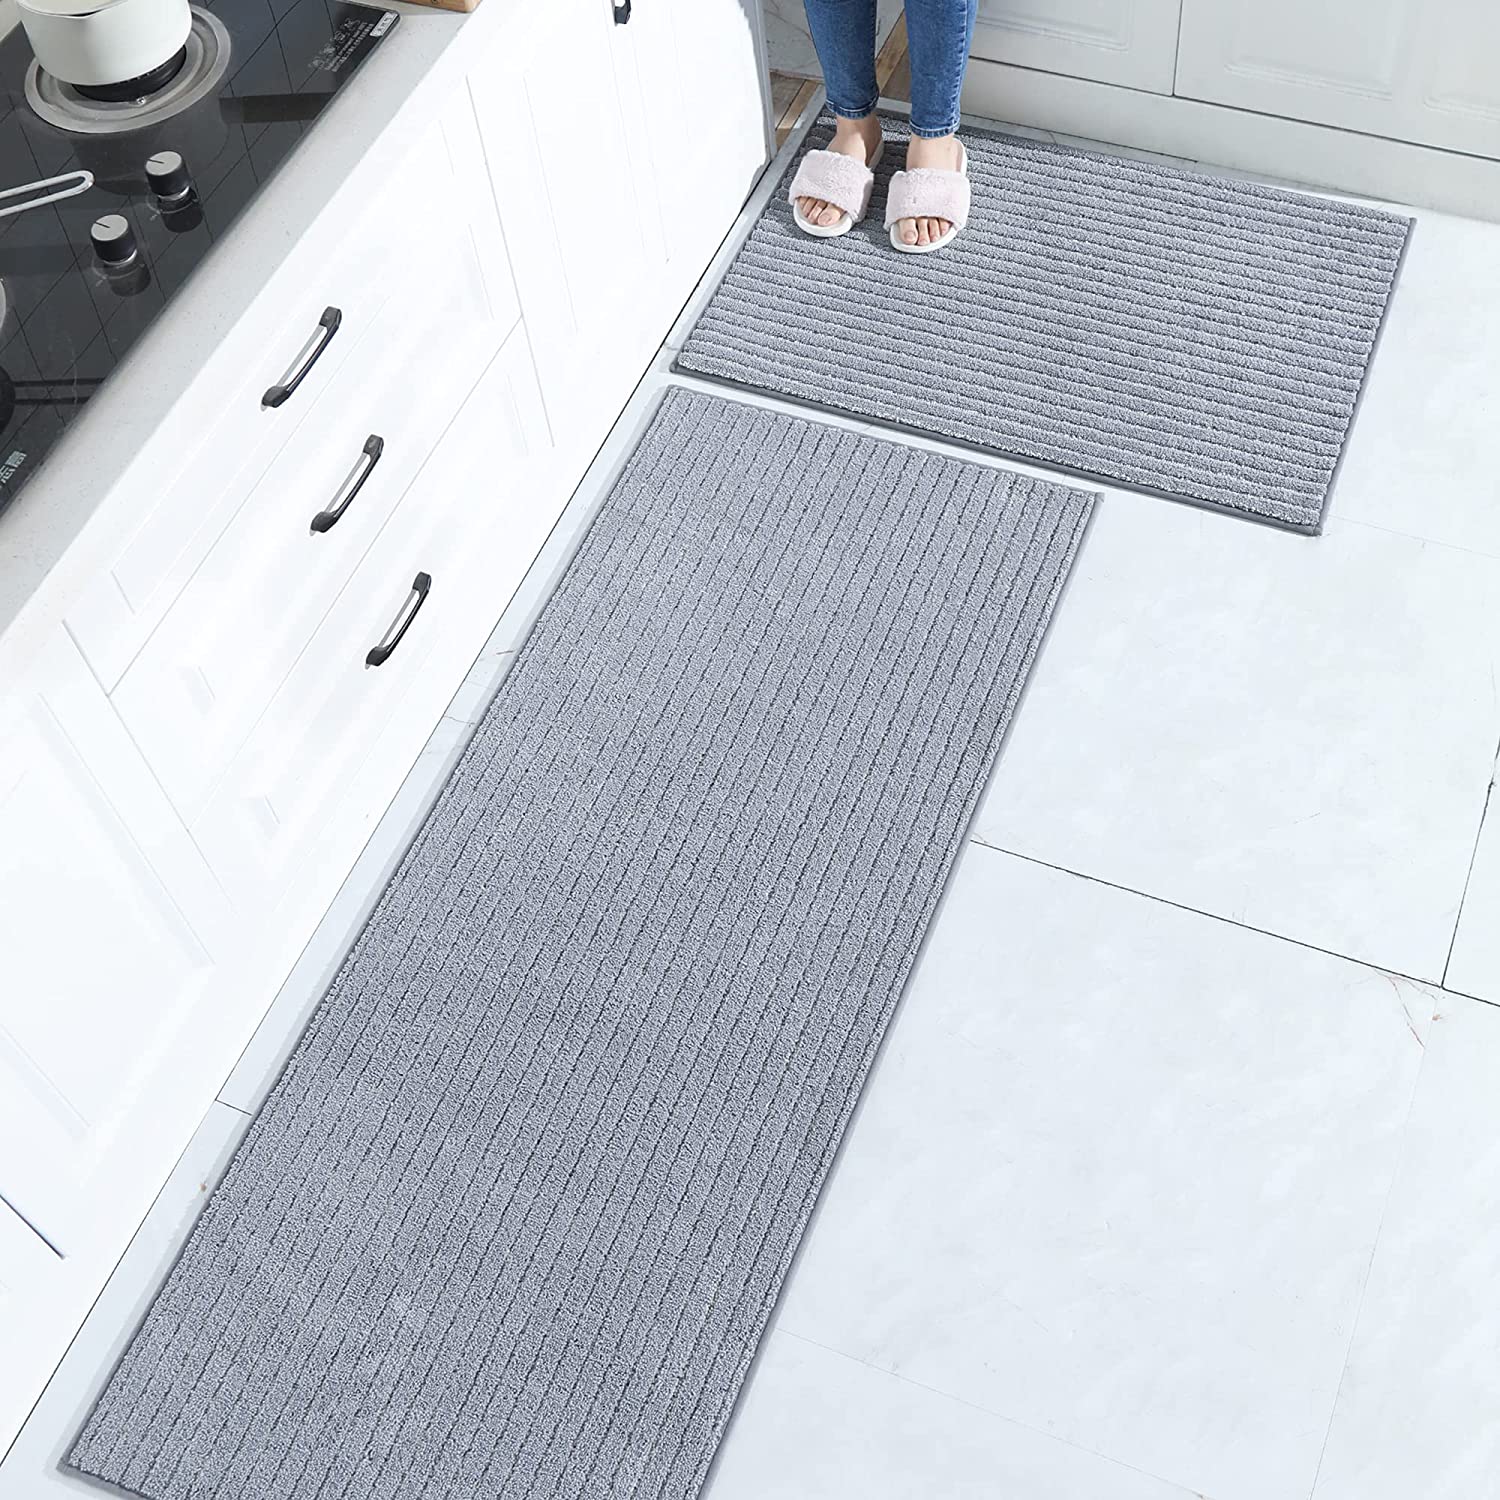 Non Skid Washable TPR Backing 100% Polyester Kitchen Mat Set of 2